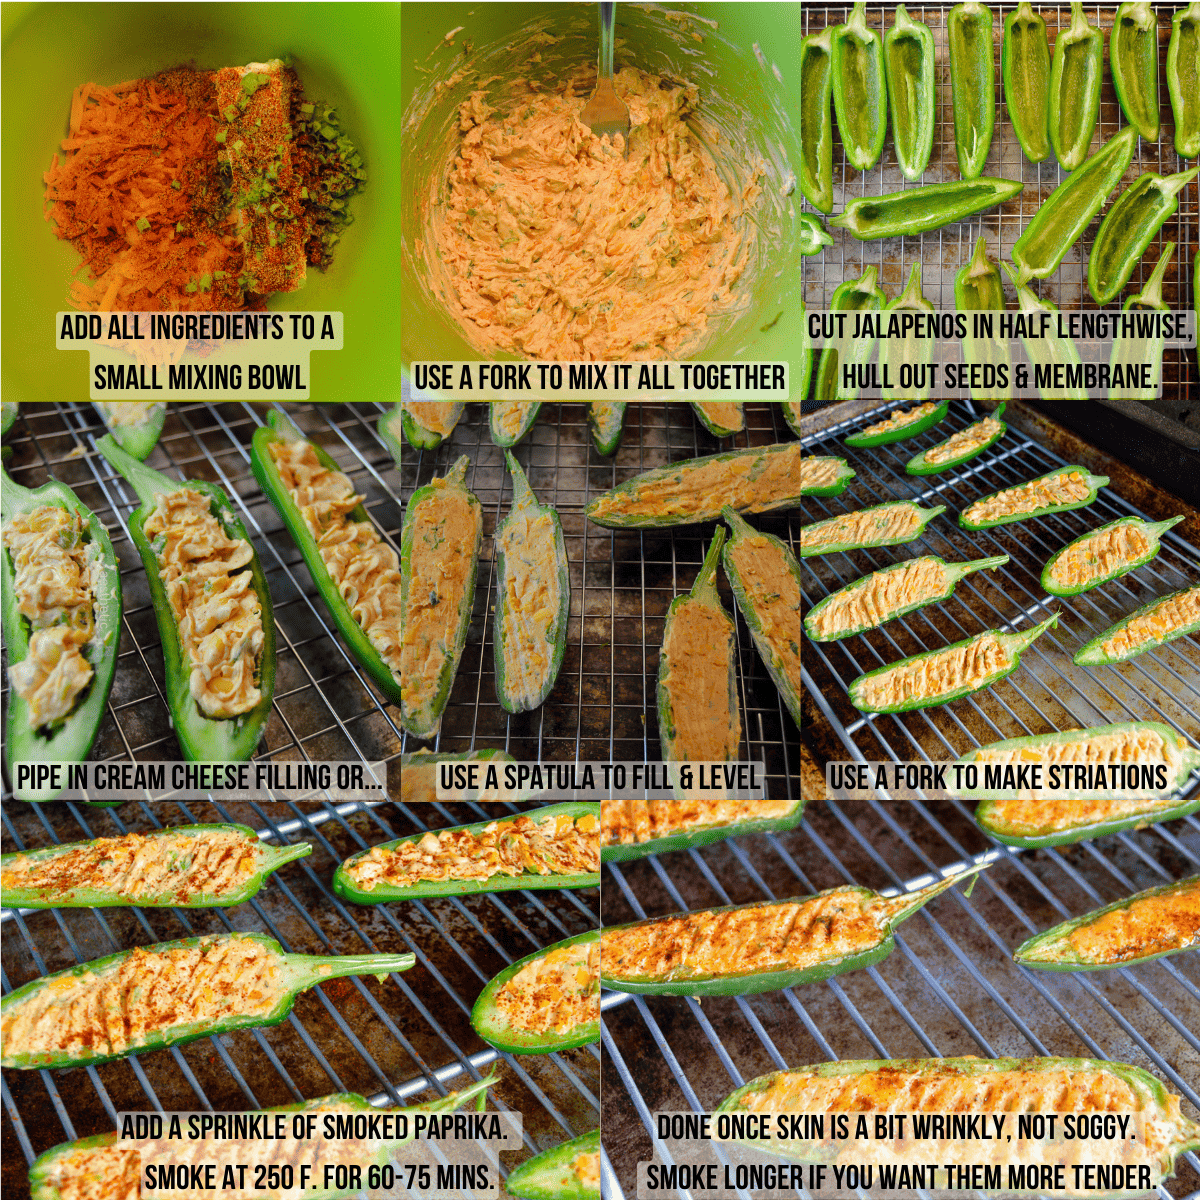 8 photo collage showing steps to make smoked jalapeno poppers in pellet smoker; in bowl with ingredients, mixed in bowl, hulled out jalapenos, piped in filling, on wire rack, topped with smoked paprika, on smoker starting and smoke complete. 